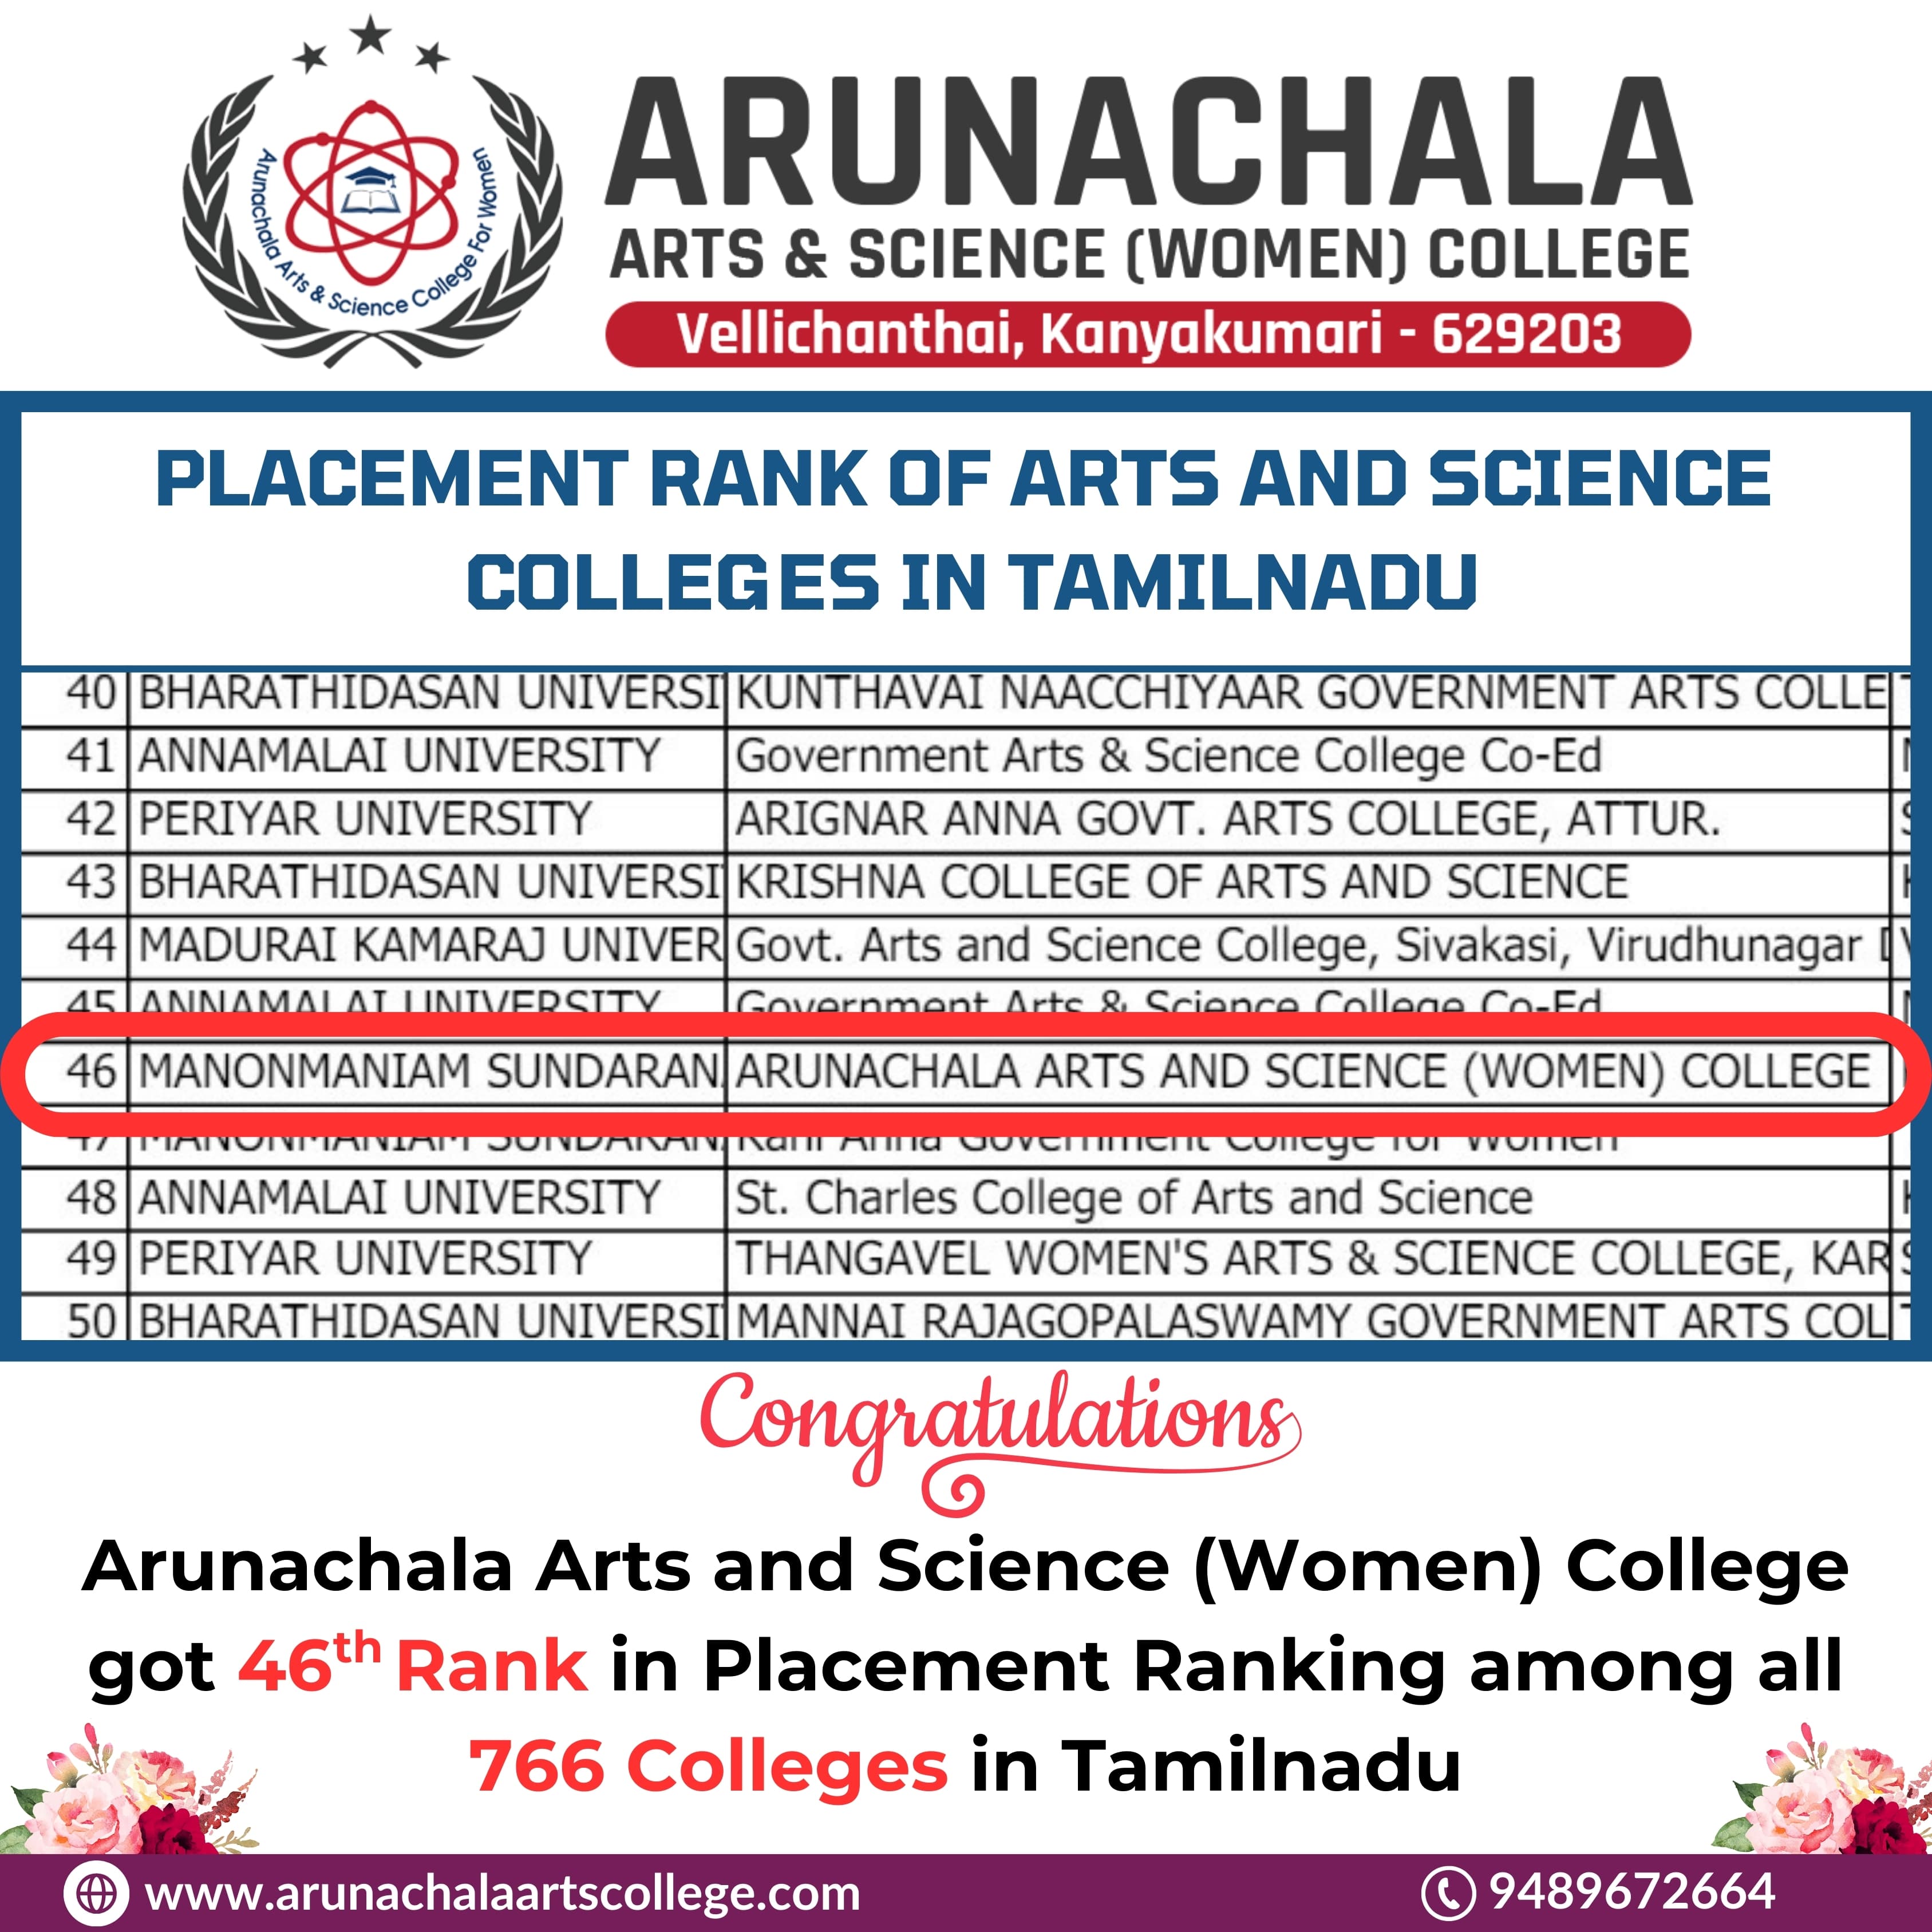 46TH RANK IN PLACEMENT AMONG 766 COLLEGES IN TAMILNADU